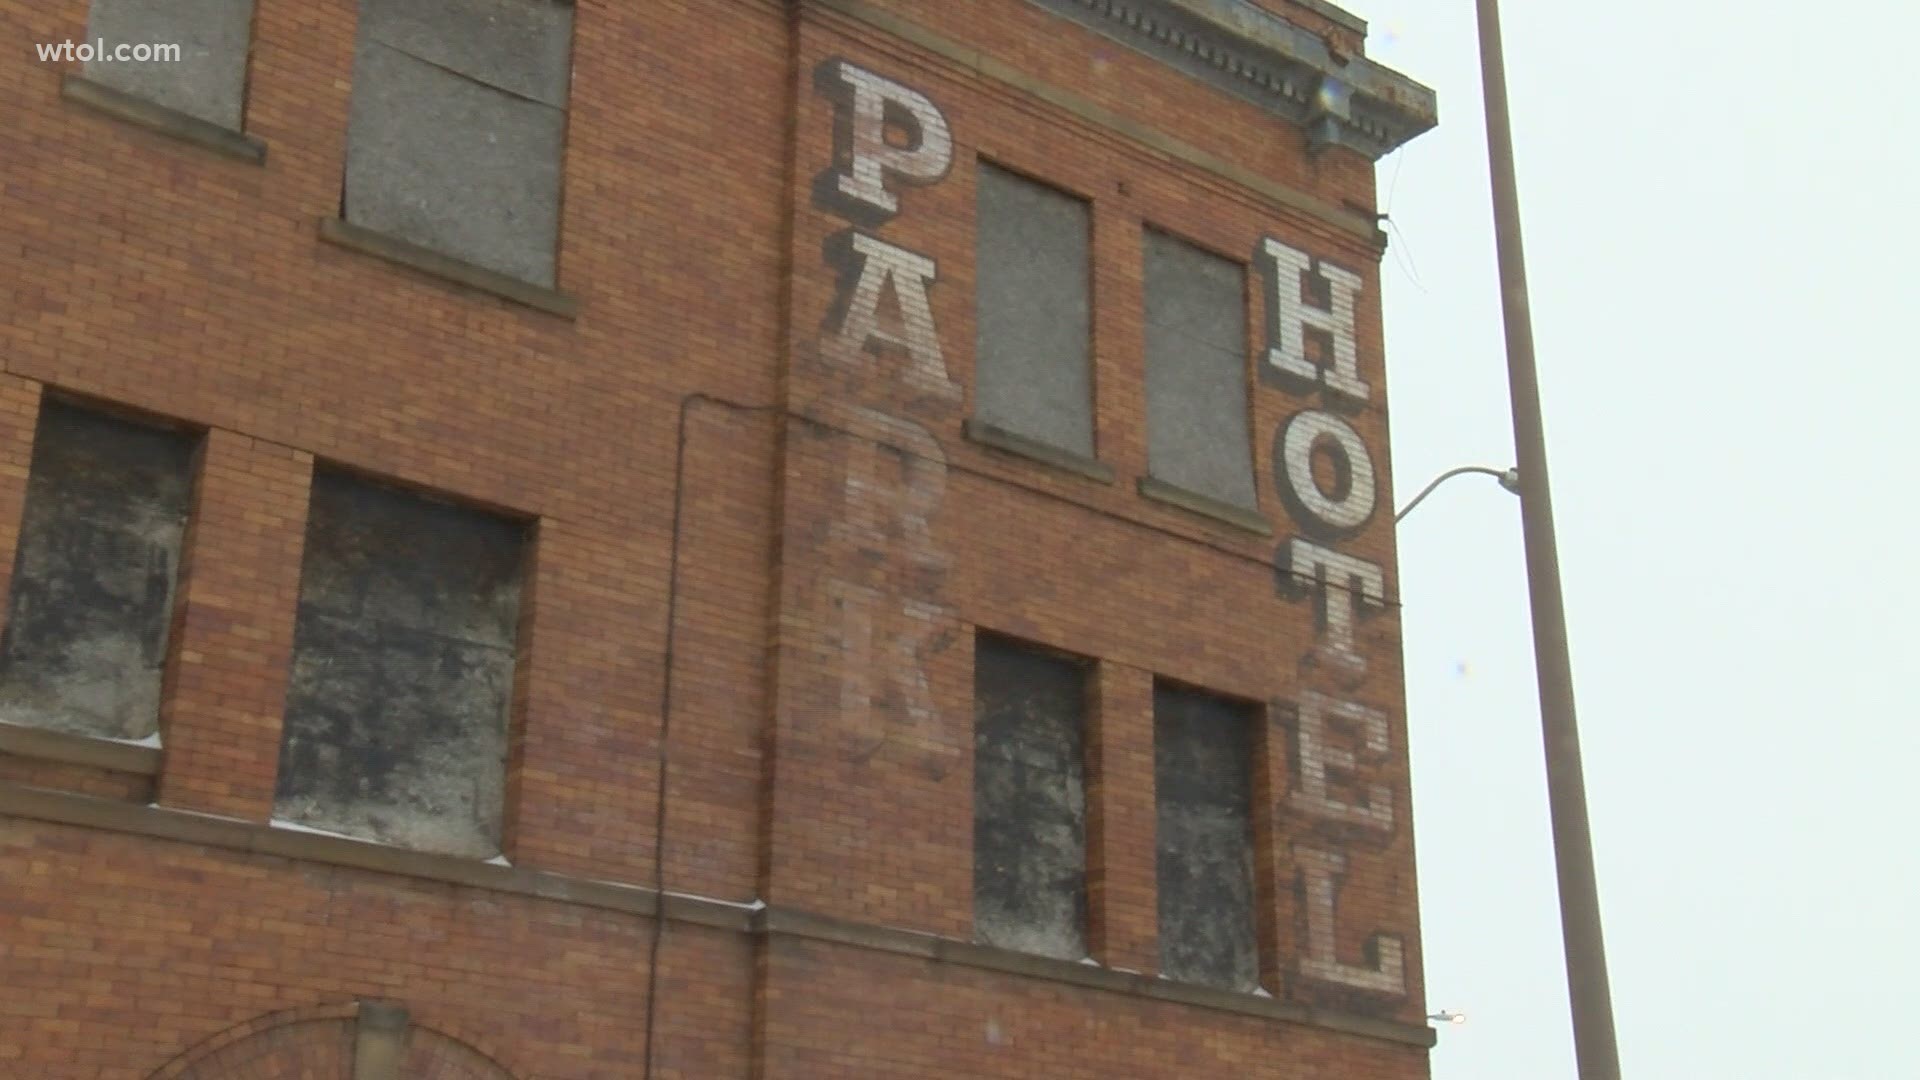 The historic Park Hotel in south Toledo currently sits vacant, but LMH has a plan to develop it into transitional housing for people aged out of foster care.